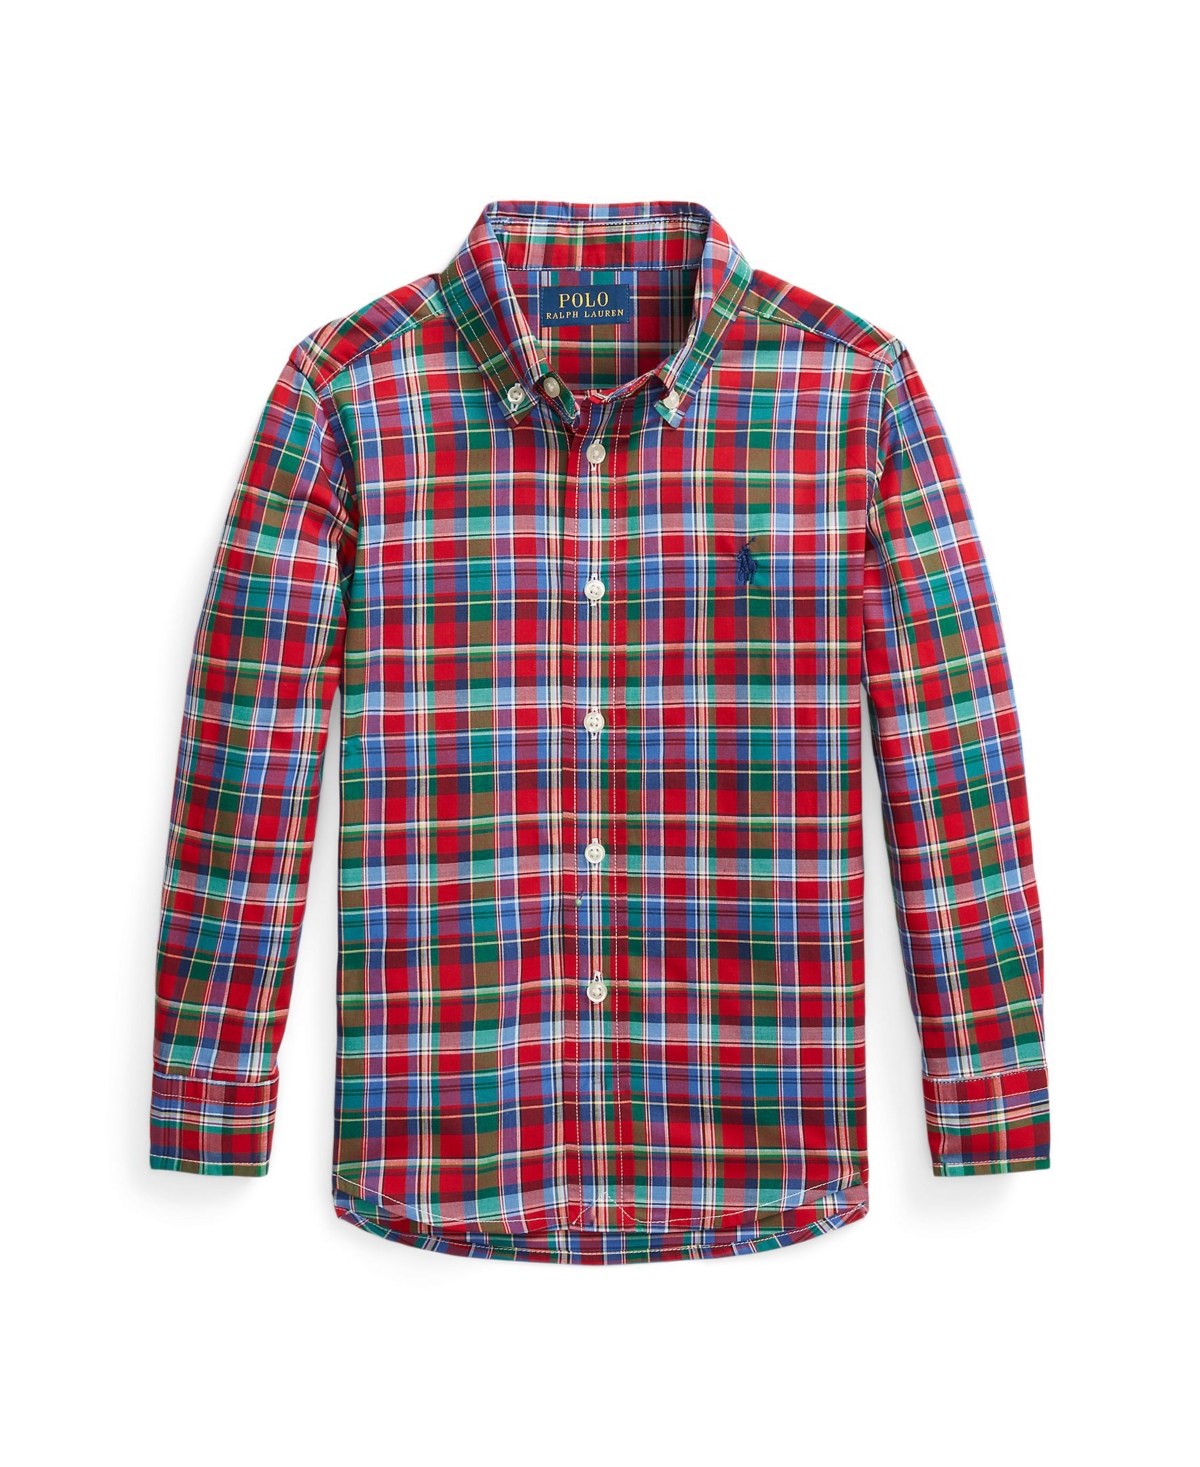 Polo Ralph Lauren Kids' Toddler And Little Boys Plaid Cotton Poplin Shirt In Red,green Multi